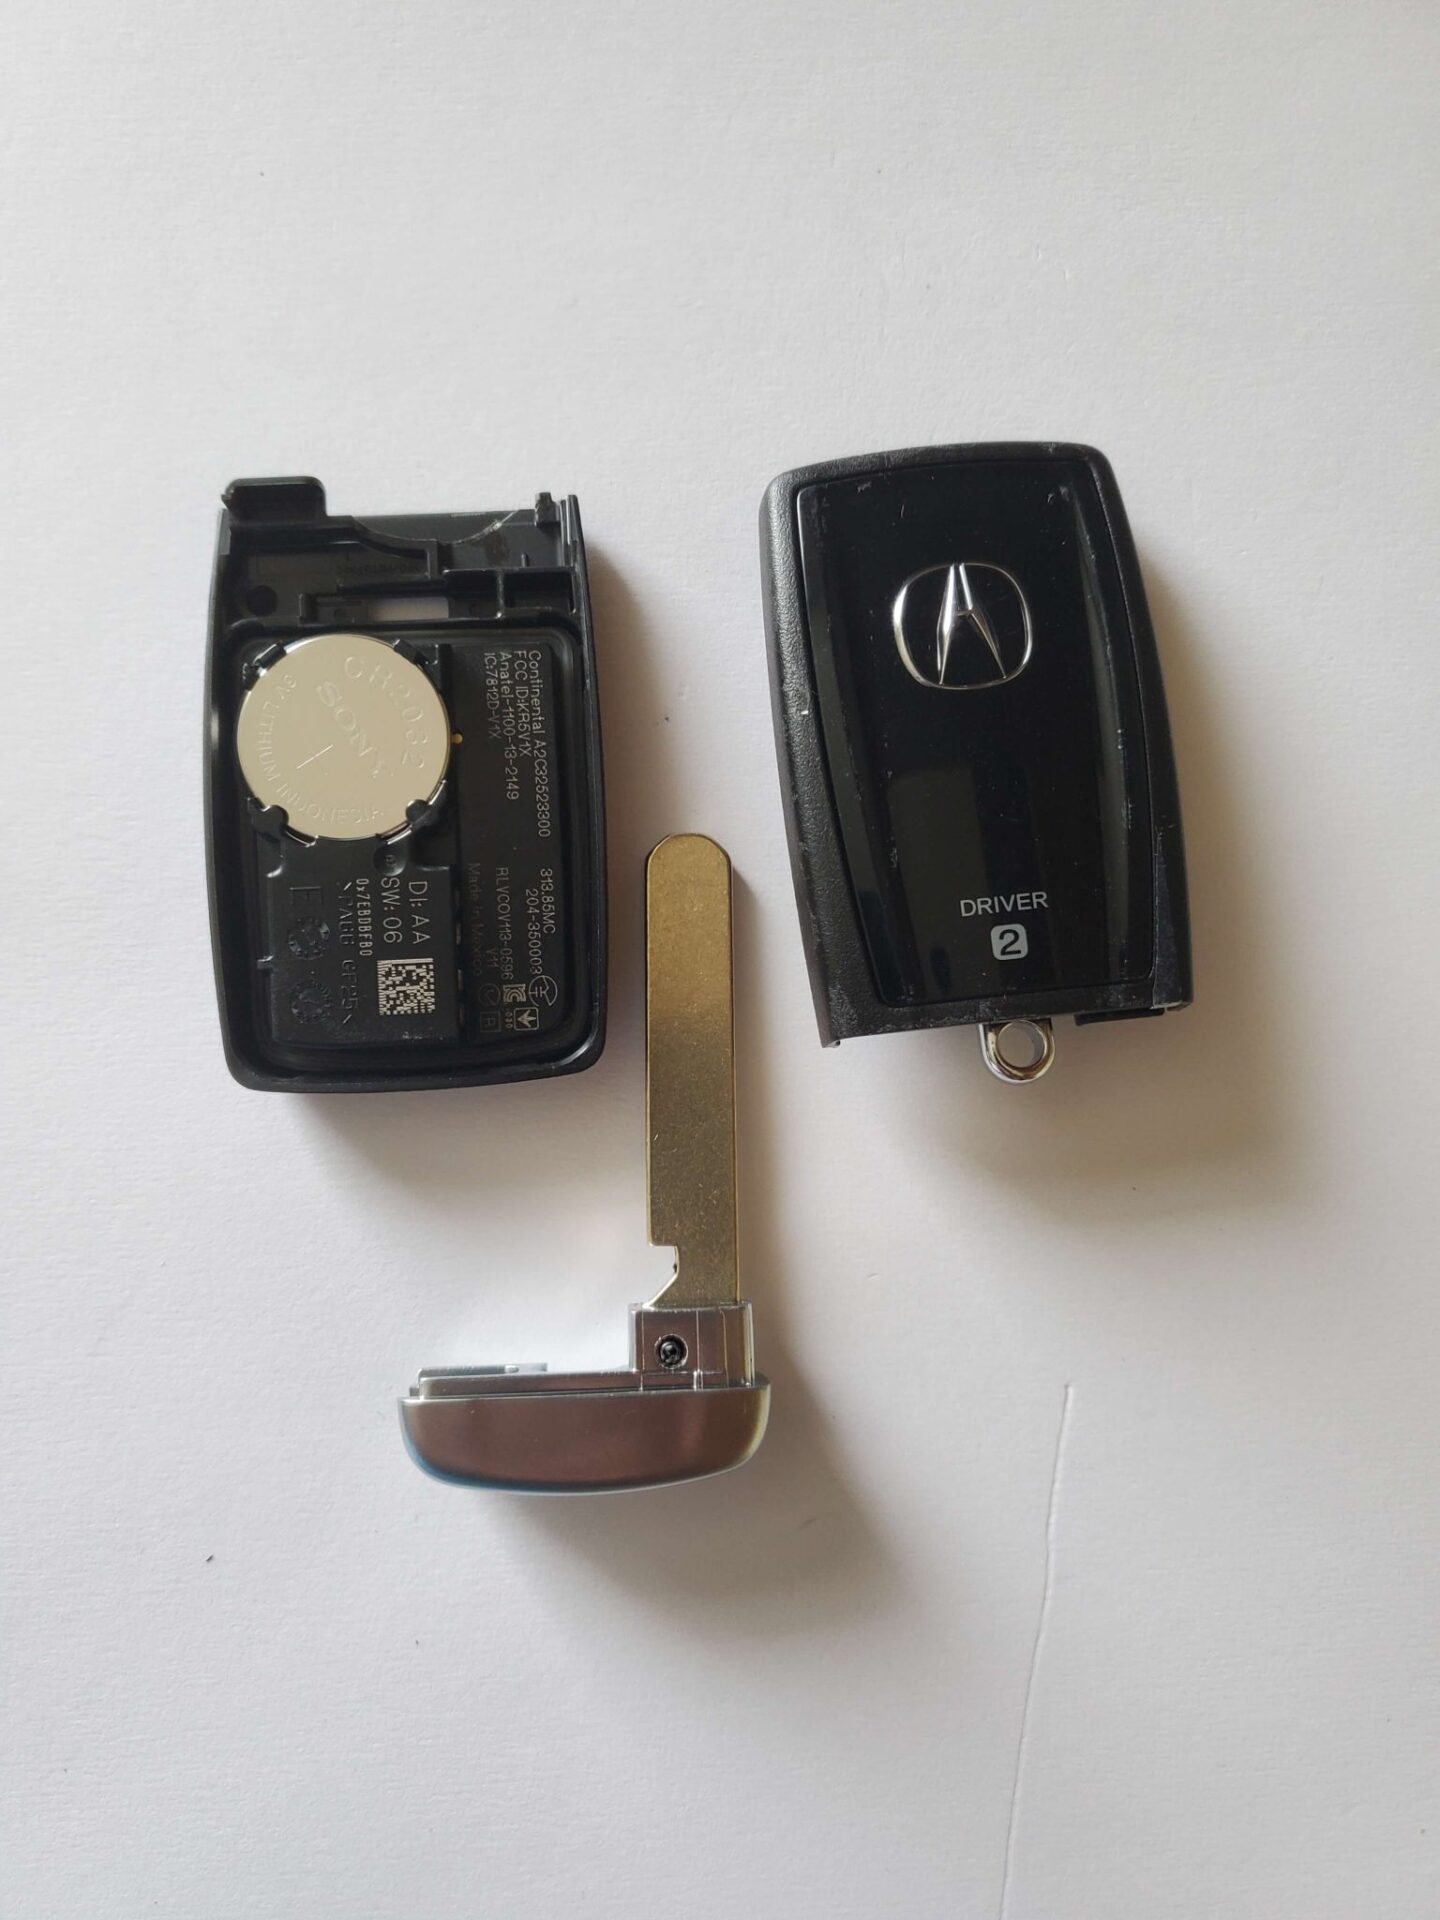 Acura MDX Key Replacement What To Do, Options, Costs & More